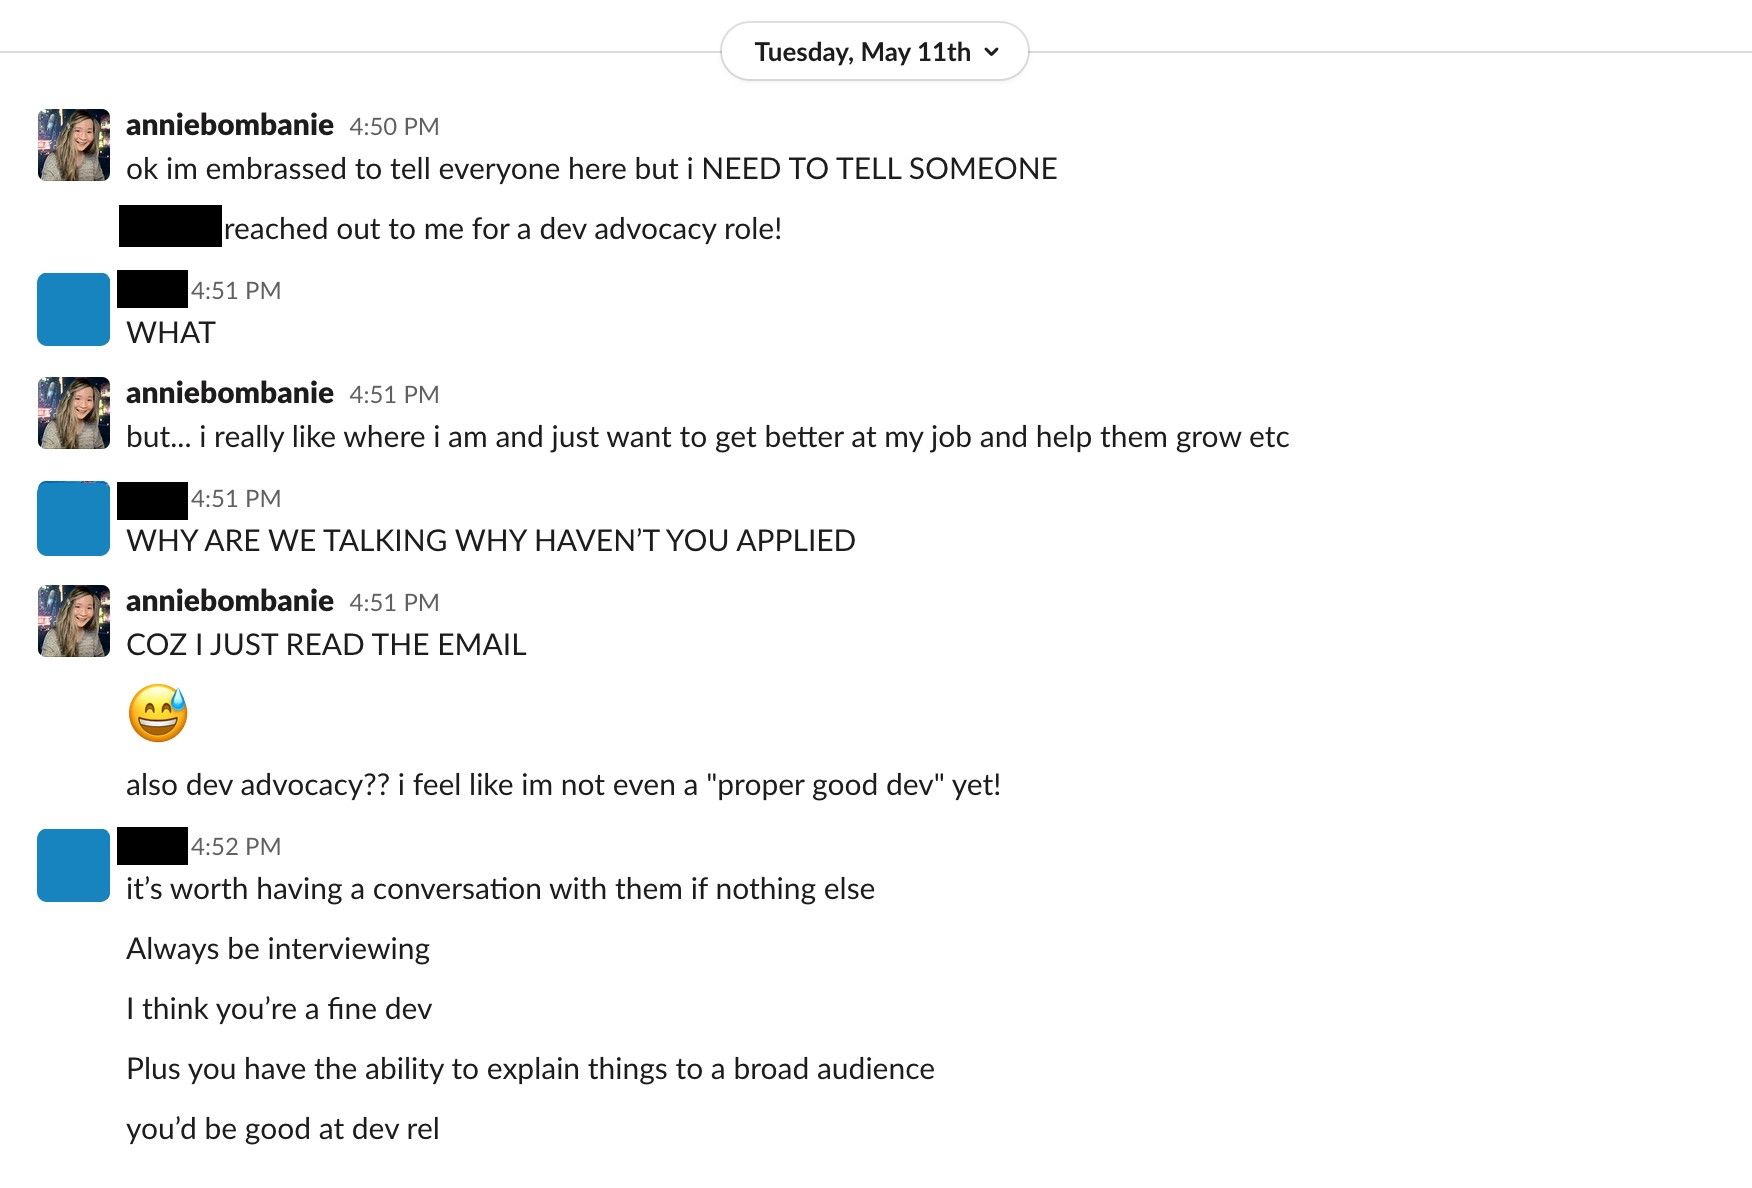 A Slack conversation on May 11th, 2021 between Annie and someone whose name is blacked out. Gist of the conversation is Annie likes her current job and isn’t sure whether to interview, especially since she doesn’t feel like a ‘proper good dev’, let alone a developer advocate. Her friend advised her to ‘always be interviewing’.